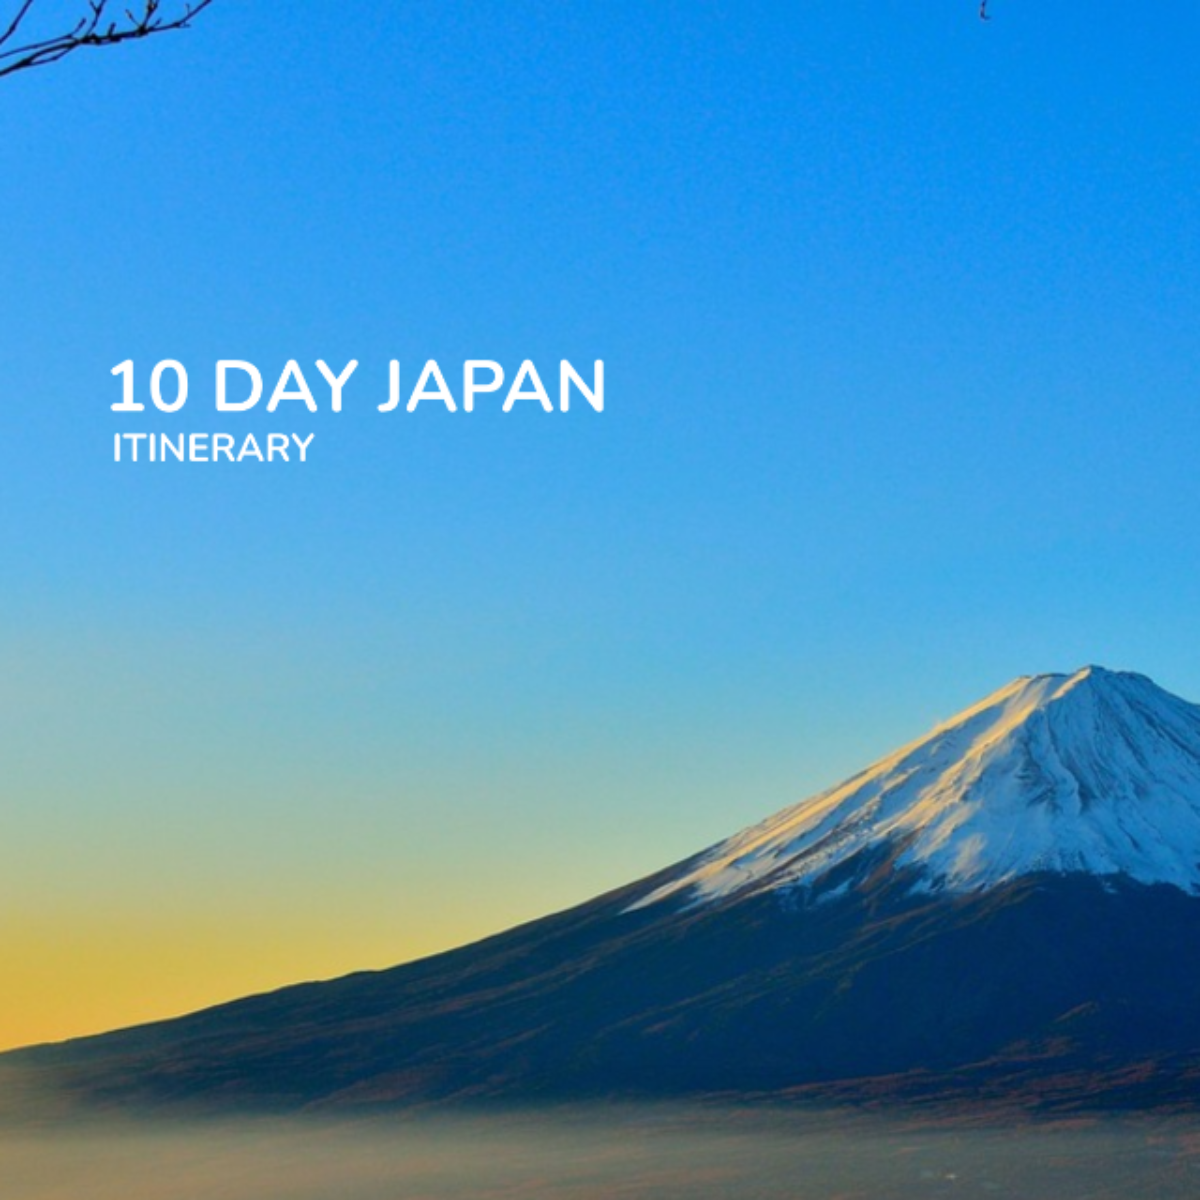 10 Day Japan Itinerary Template